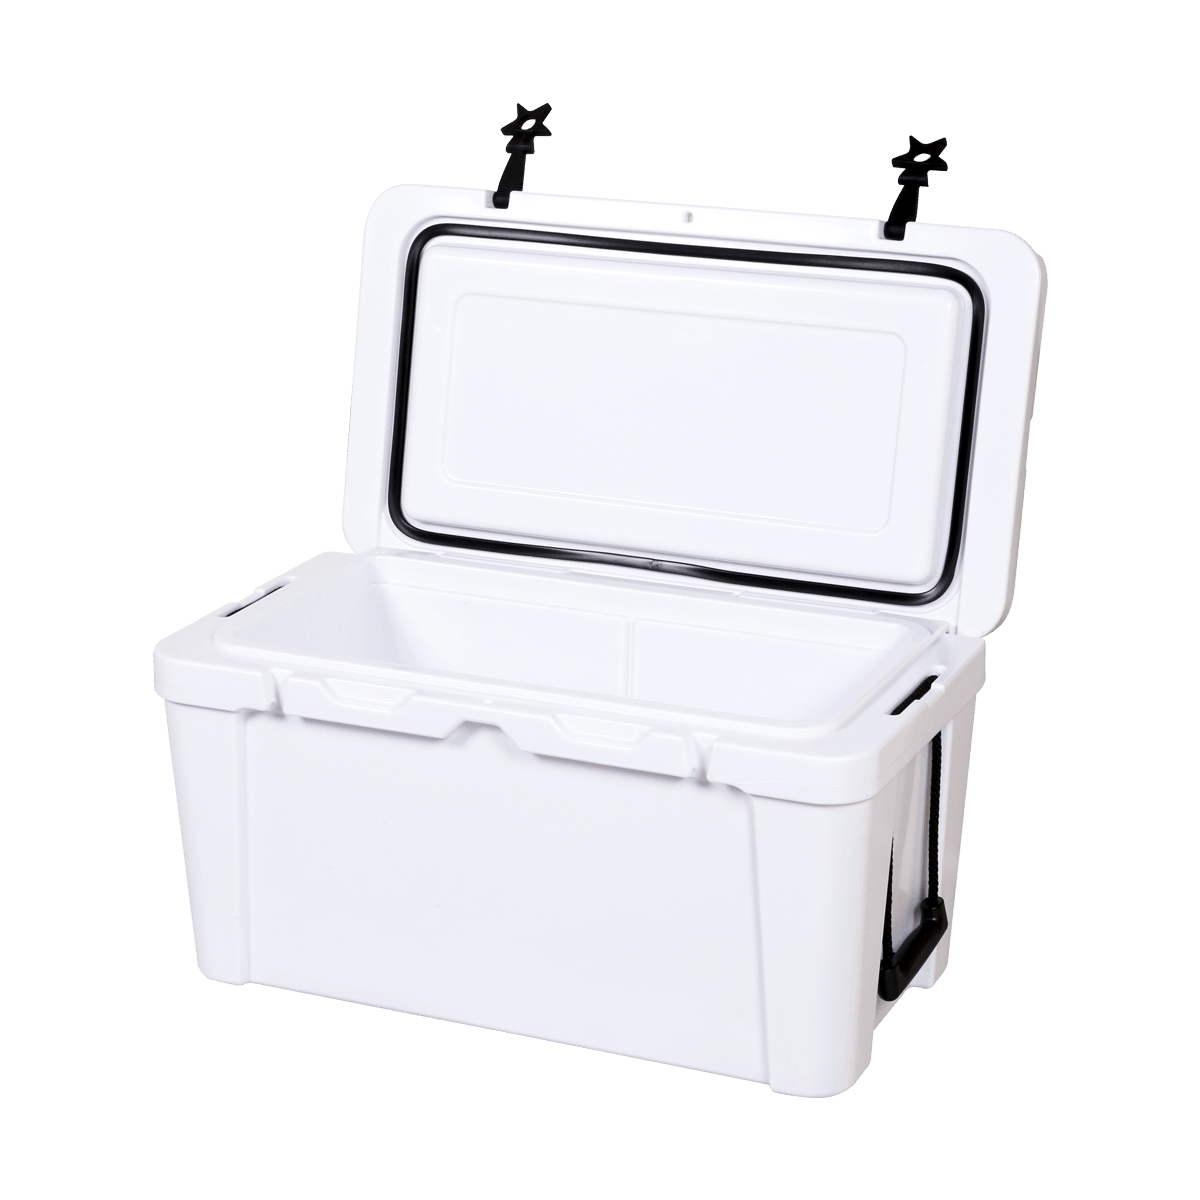 K-65L Outdoor Leisure Use Insulated Cooler Ice Box  